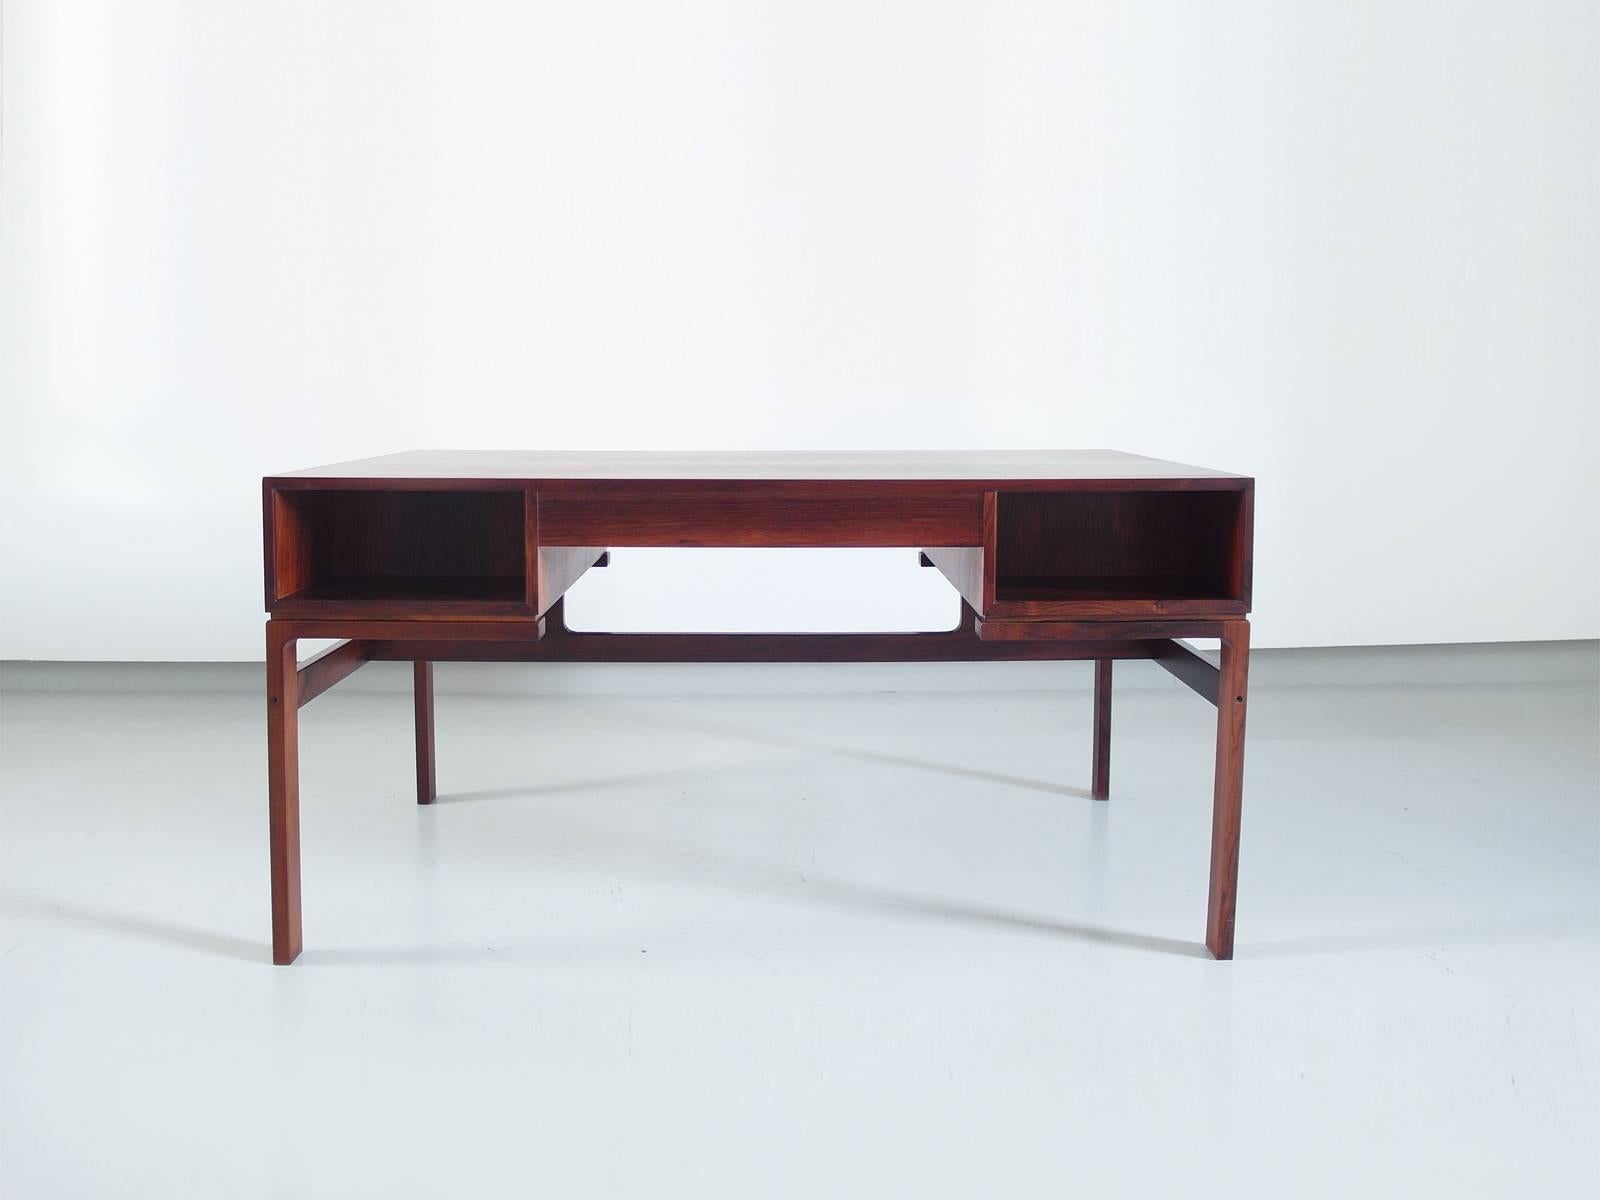 A Danish modern rosewood desk, designed by Arne Wahl Iversen and manufactured by Vinde Mobelfabrik, Denmark, 1950s. Stunning piece, which stands out for its classic design, highly figured rosewood and exposed finger joints display the desk’s